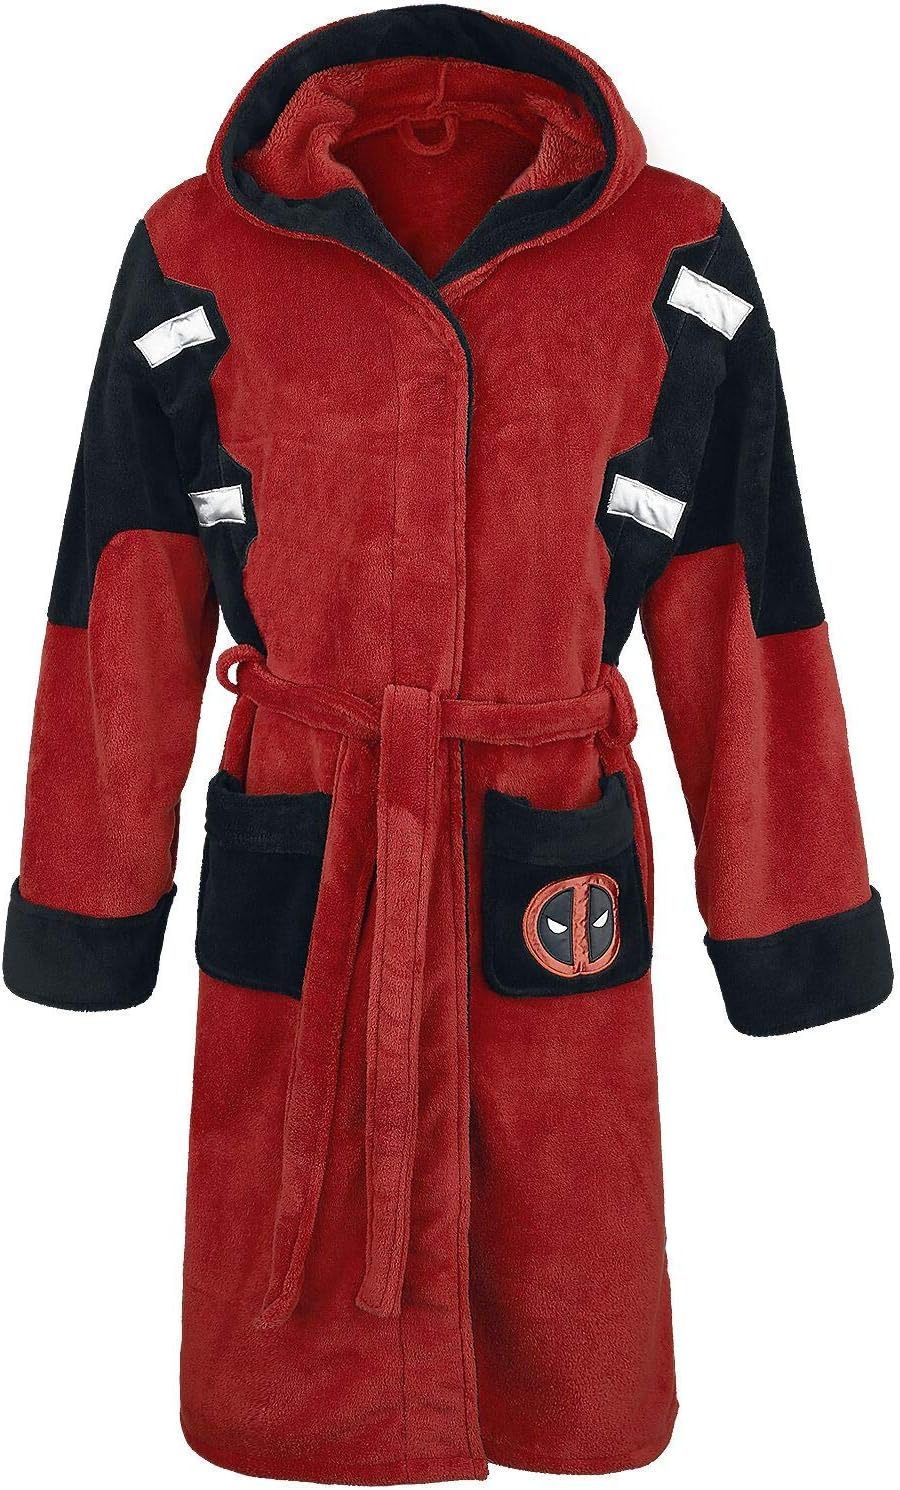 Deadpool Official Marvel Fleece Adult Dressing Gown Bathrobe, Red, One Size